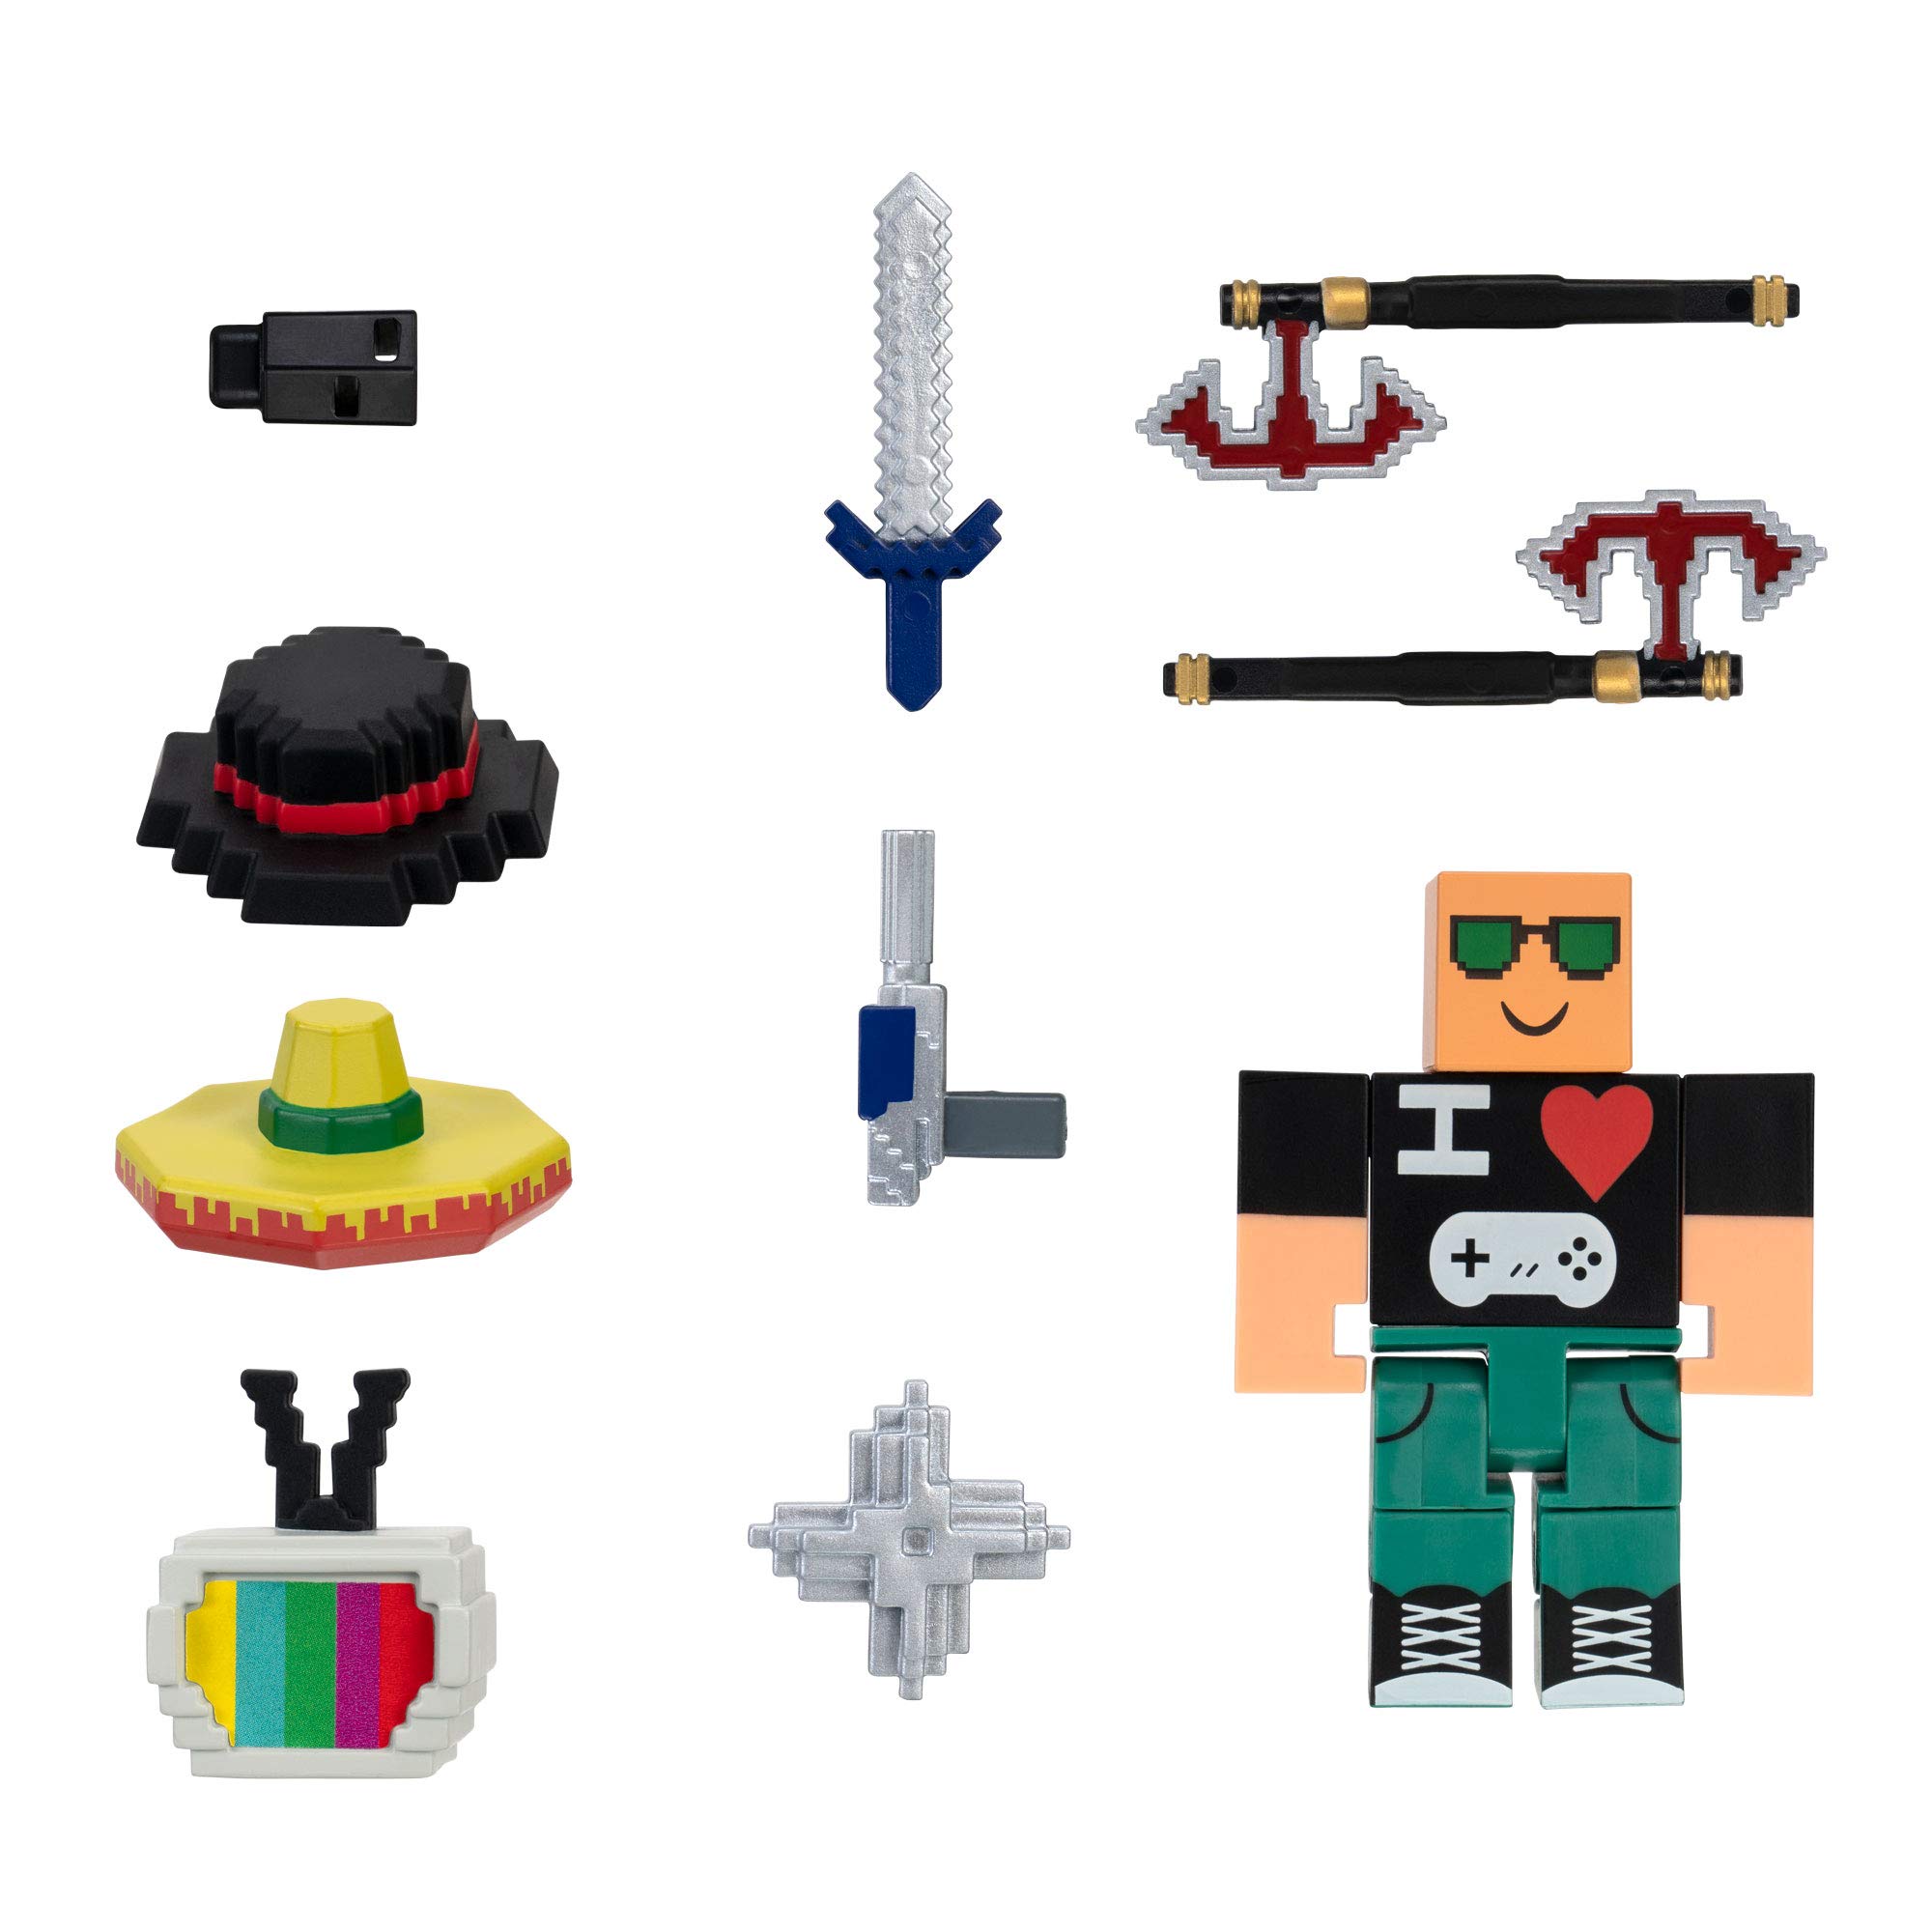 Tải xuống APK Wallpapers of Roblox Avatars Ideas cho Android